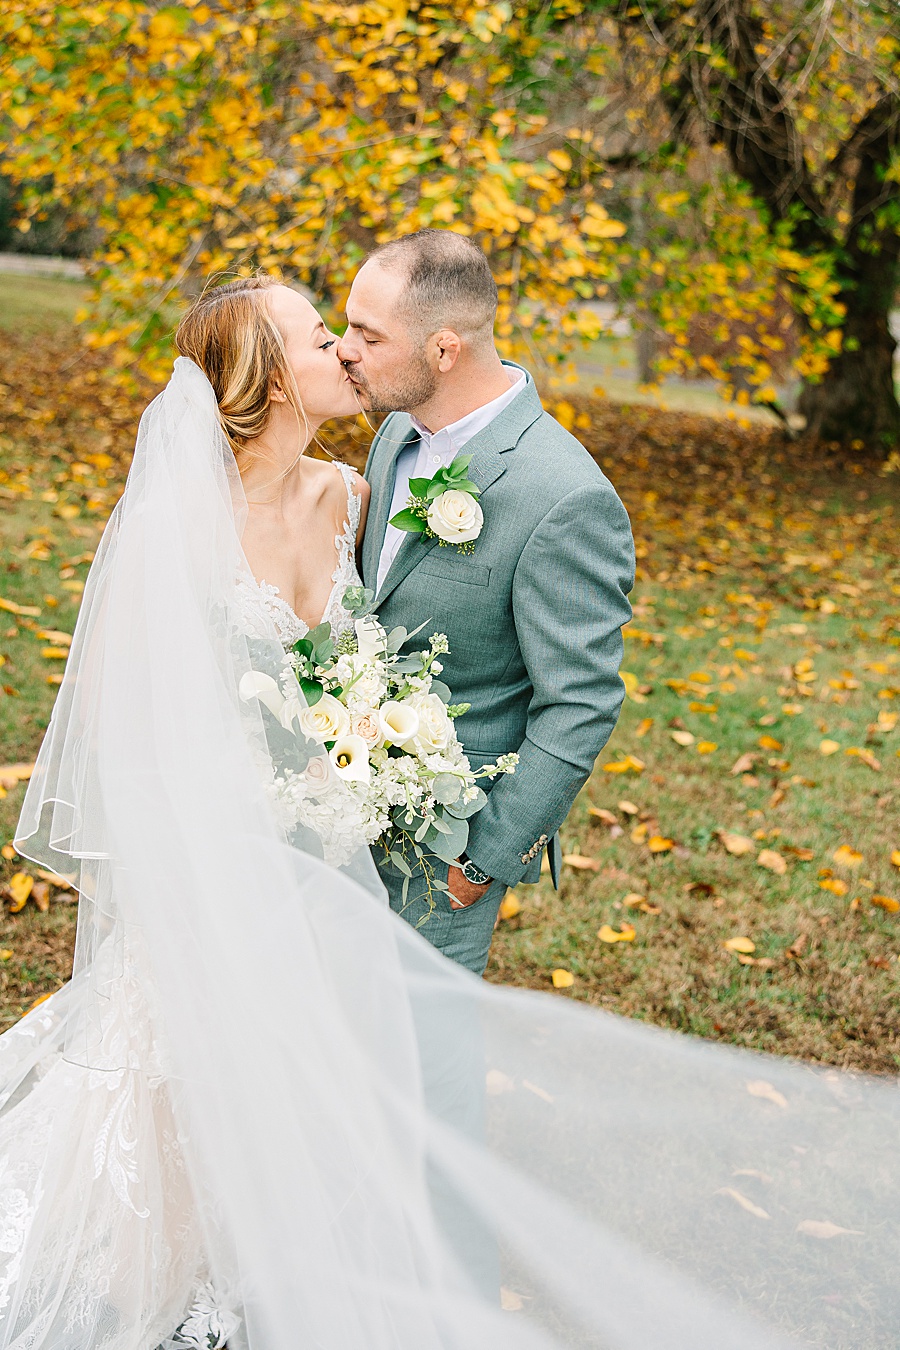 Bride & groom kissing at park wedding in Knoxville TN by Mandy Hart Photo, Knoxville TN Wedding Photographer